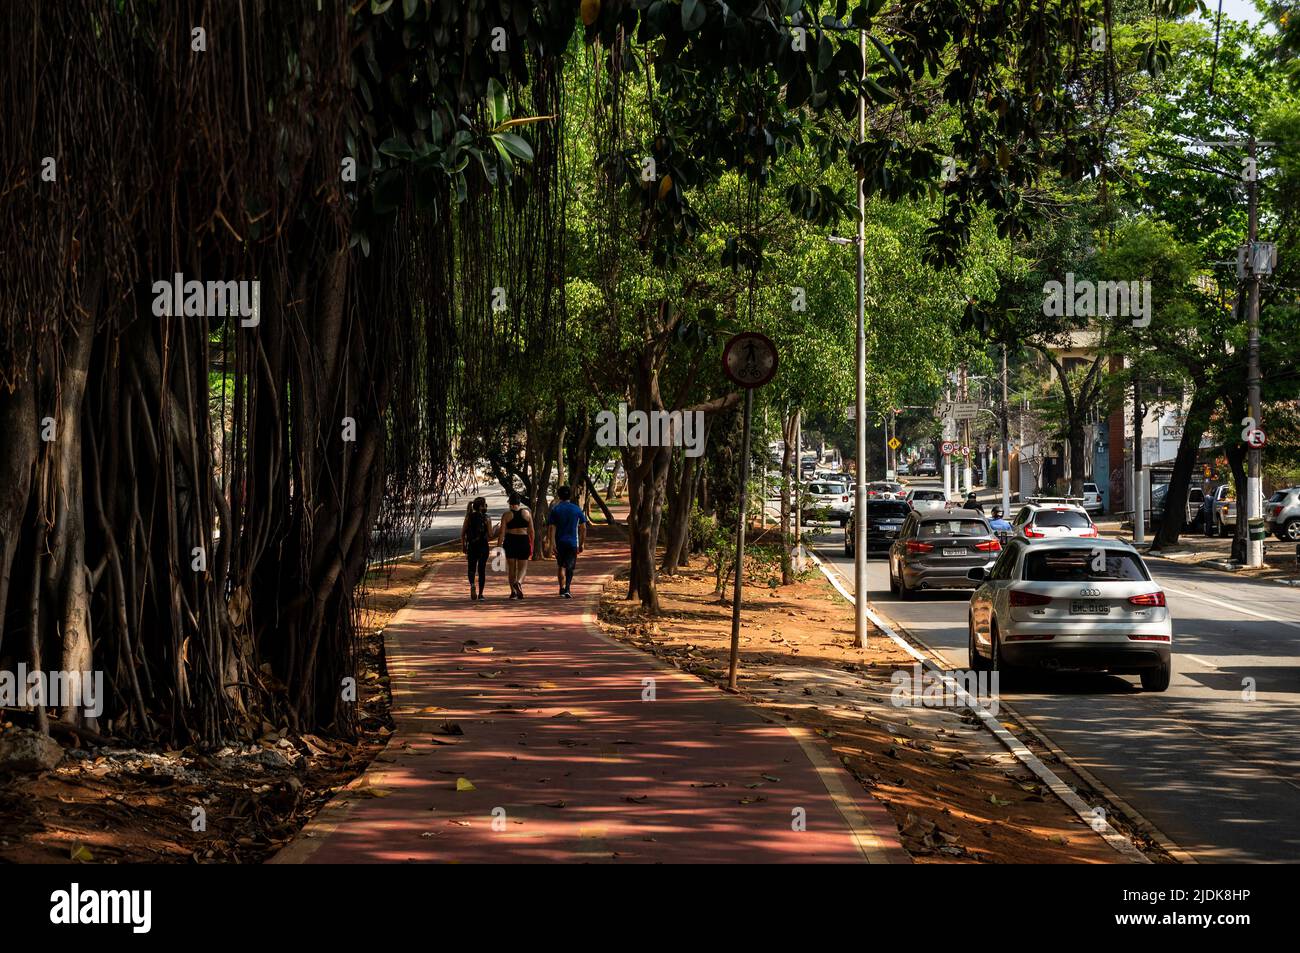 Bicycle lane section located on the median strip of Sumare avenue surrounded by dense vegetation and tree shade while business day traffic pass. Stock Photo